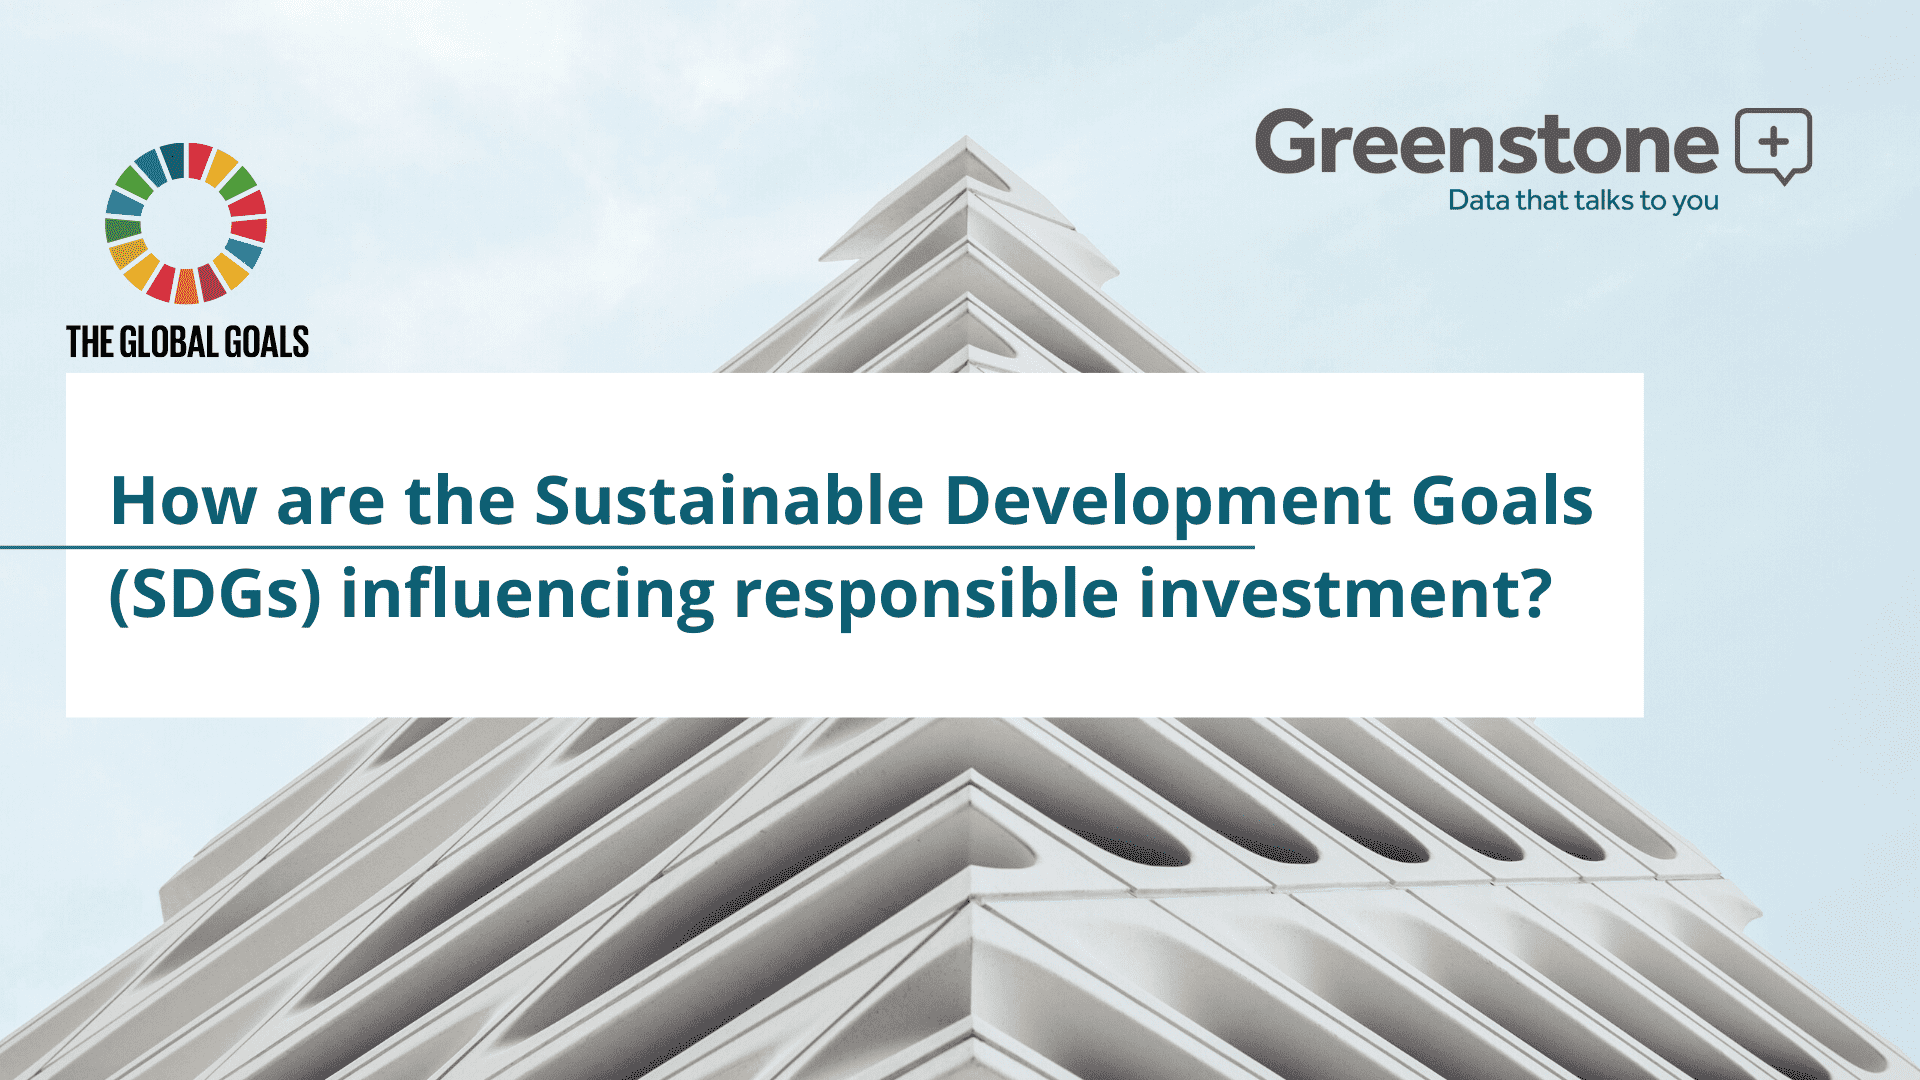 How are the Sustainable Development Goals (SDGs) influencing responsible investment?